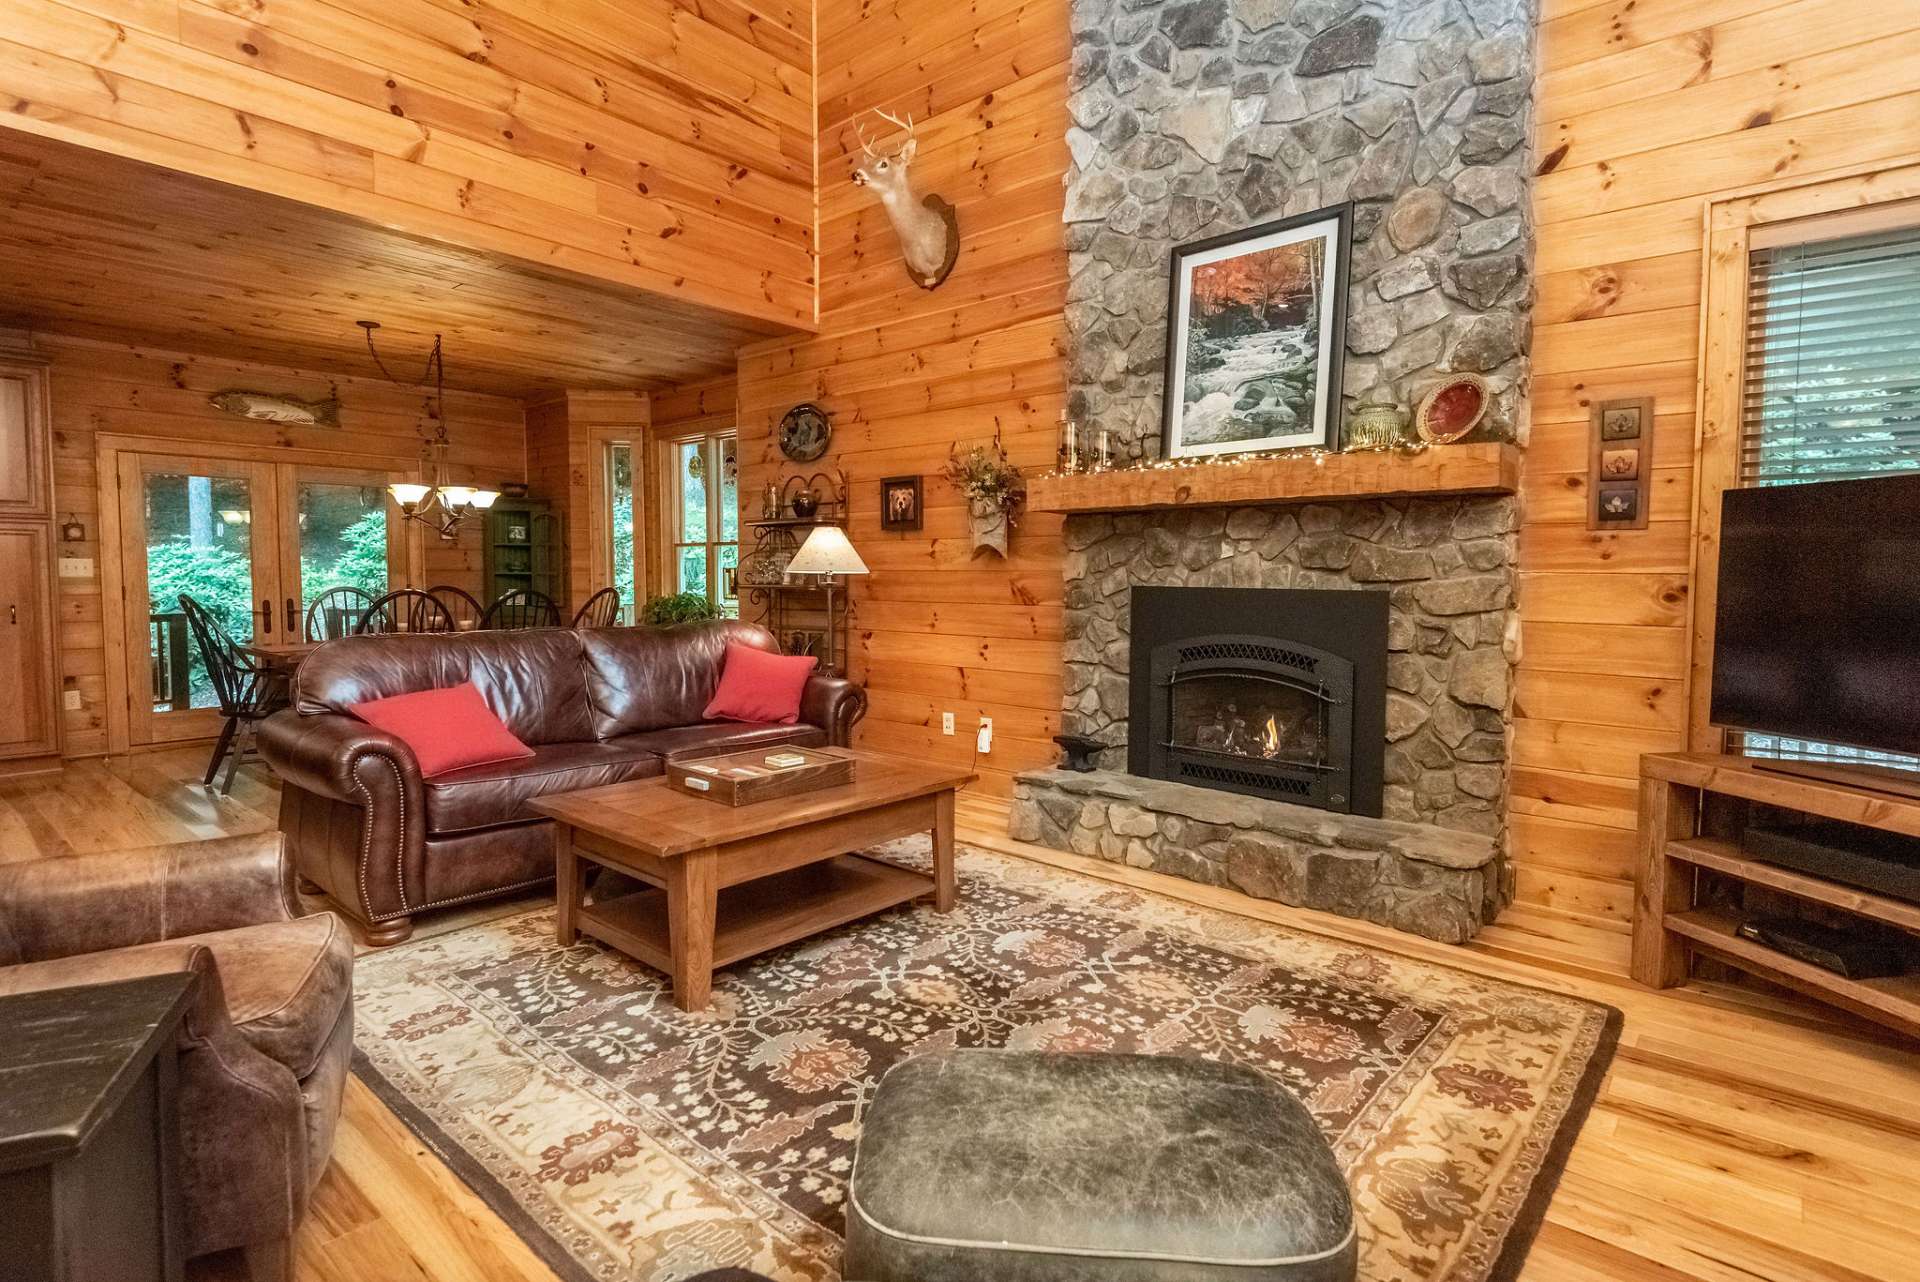 Living room features floor to ceiling gas log fireplace.